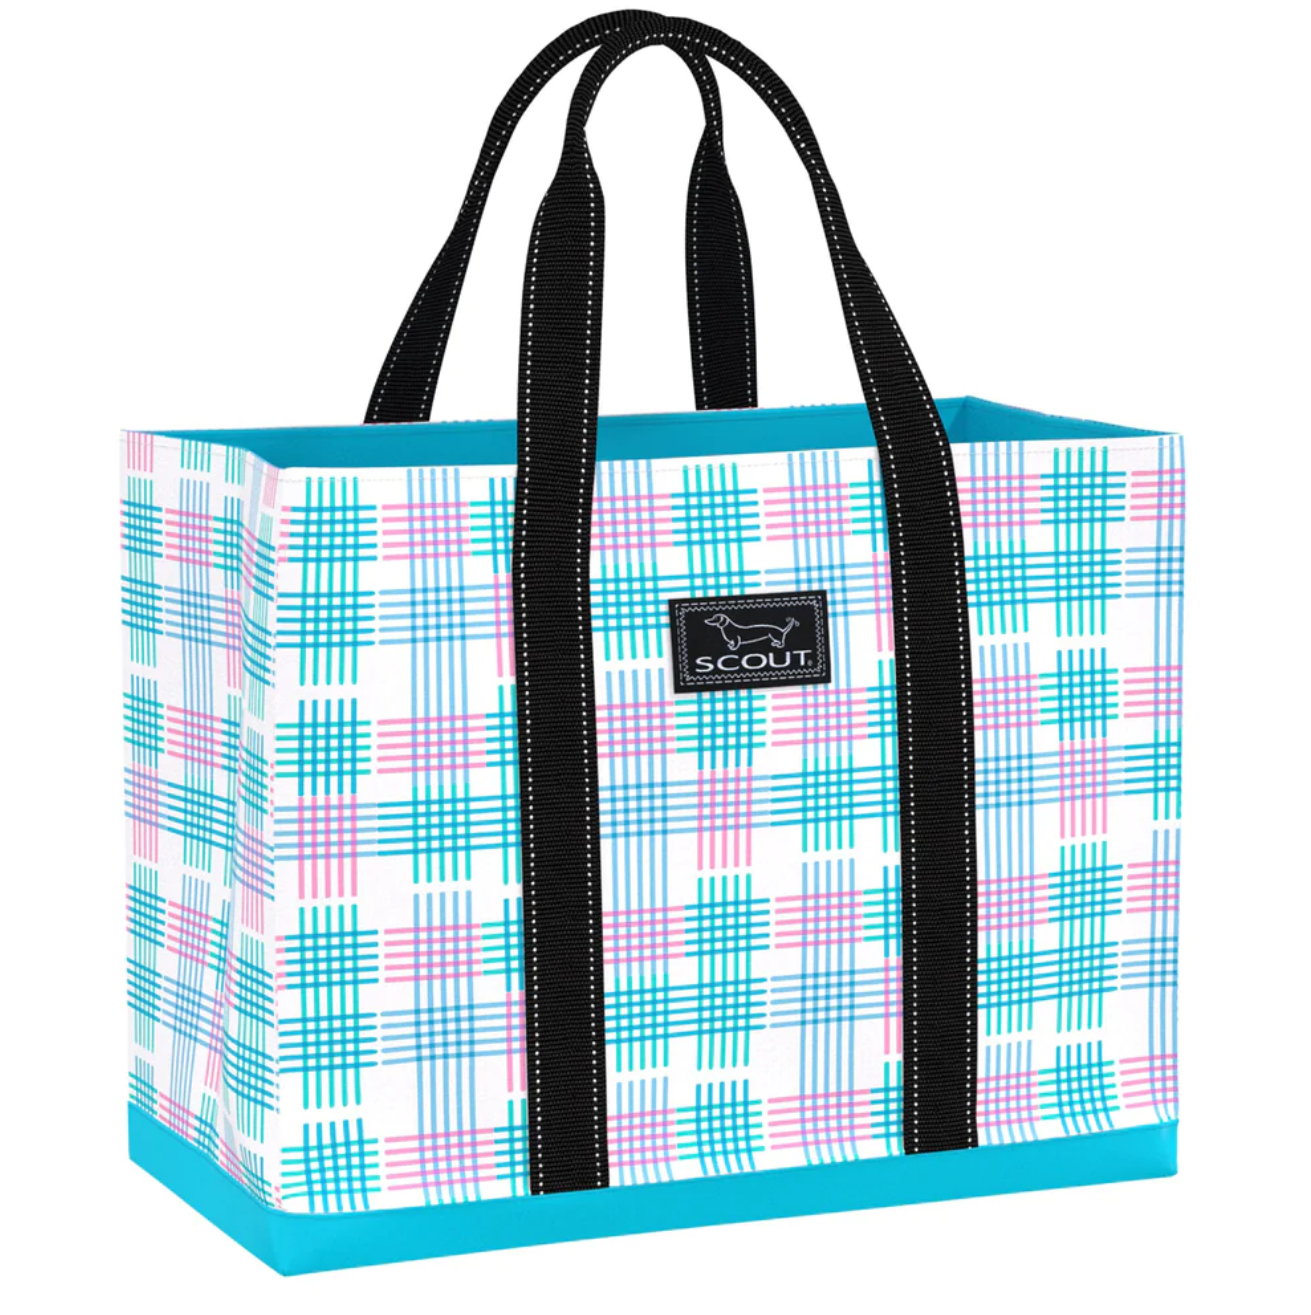 Scout Original Deano Tote Luggage, Totes in Croquet Monsieur at Wrapsody